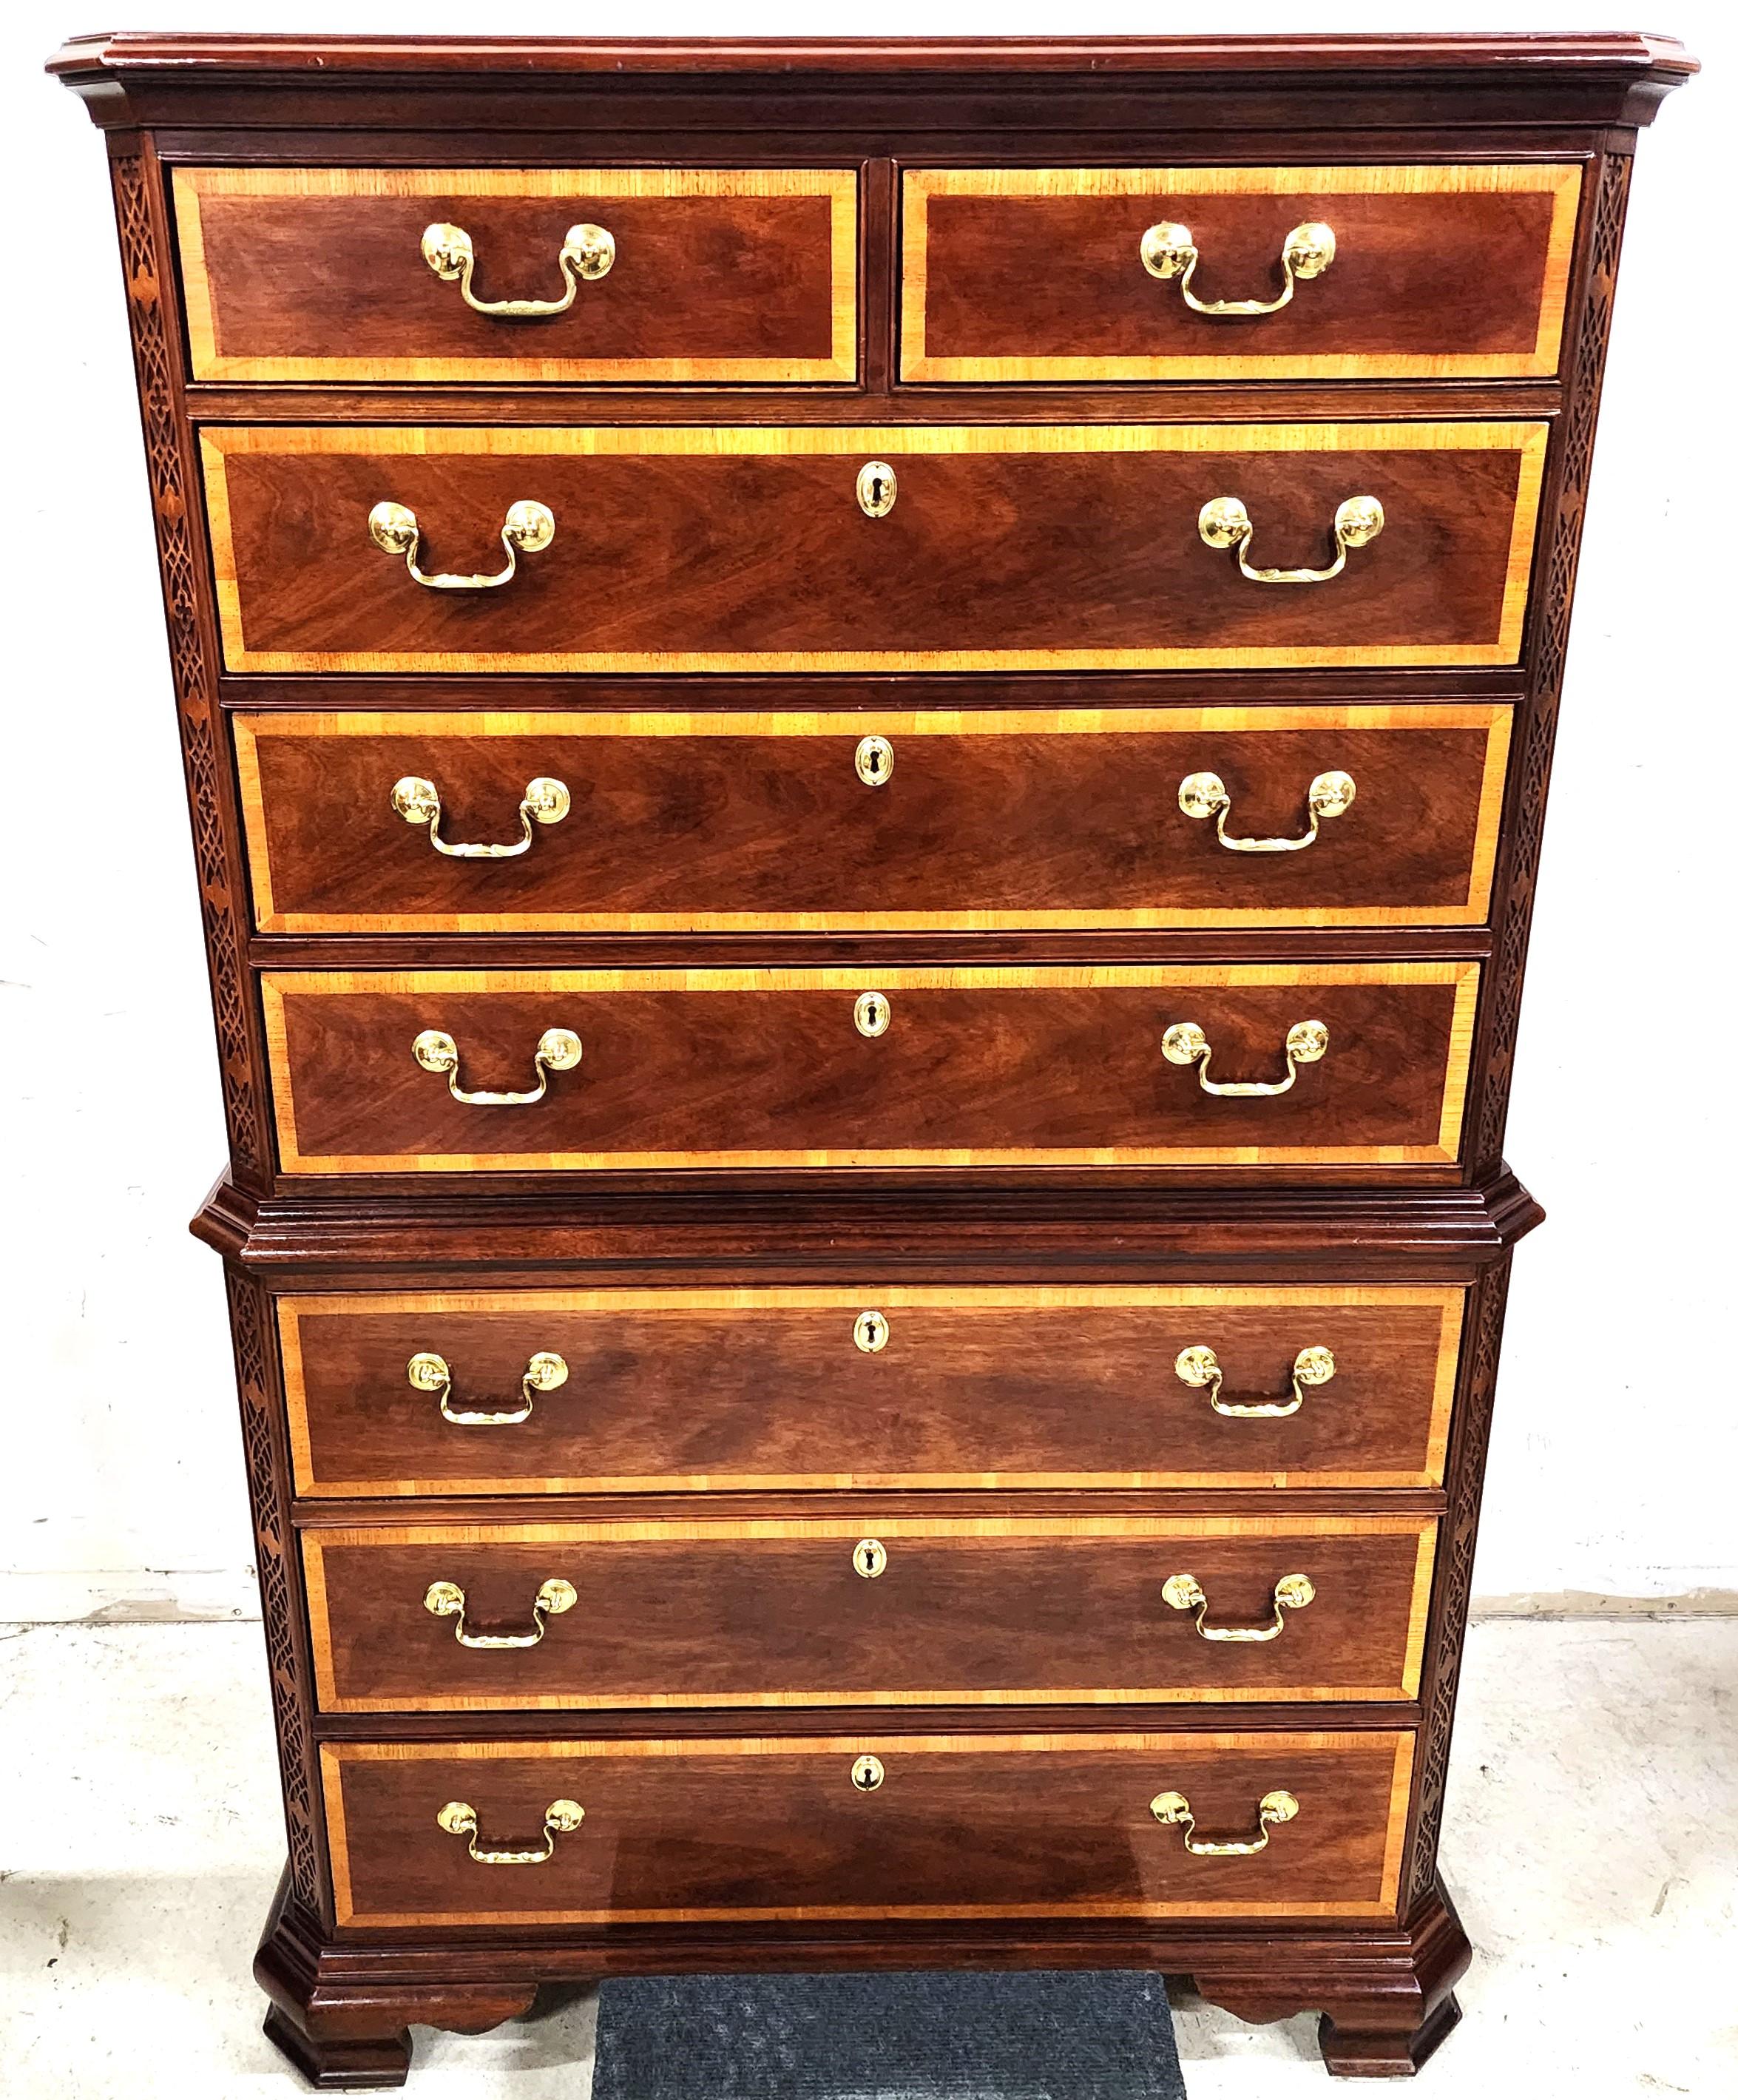 For FULL item description click on CONTINUE READING at the bottom of this page.

Offering One Of Our Recent Palm Beach Estate Fine Furniture Acquisitions Of A 
Thomasville Banded Mahogany Chippendale Georgian Style Chest Of Drawers
With solid brass